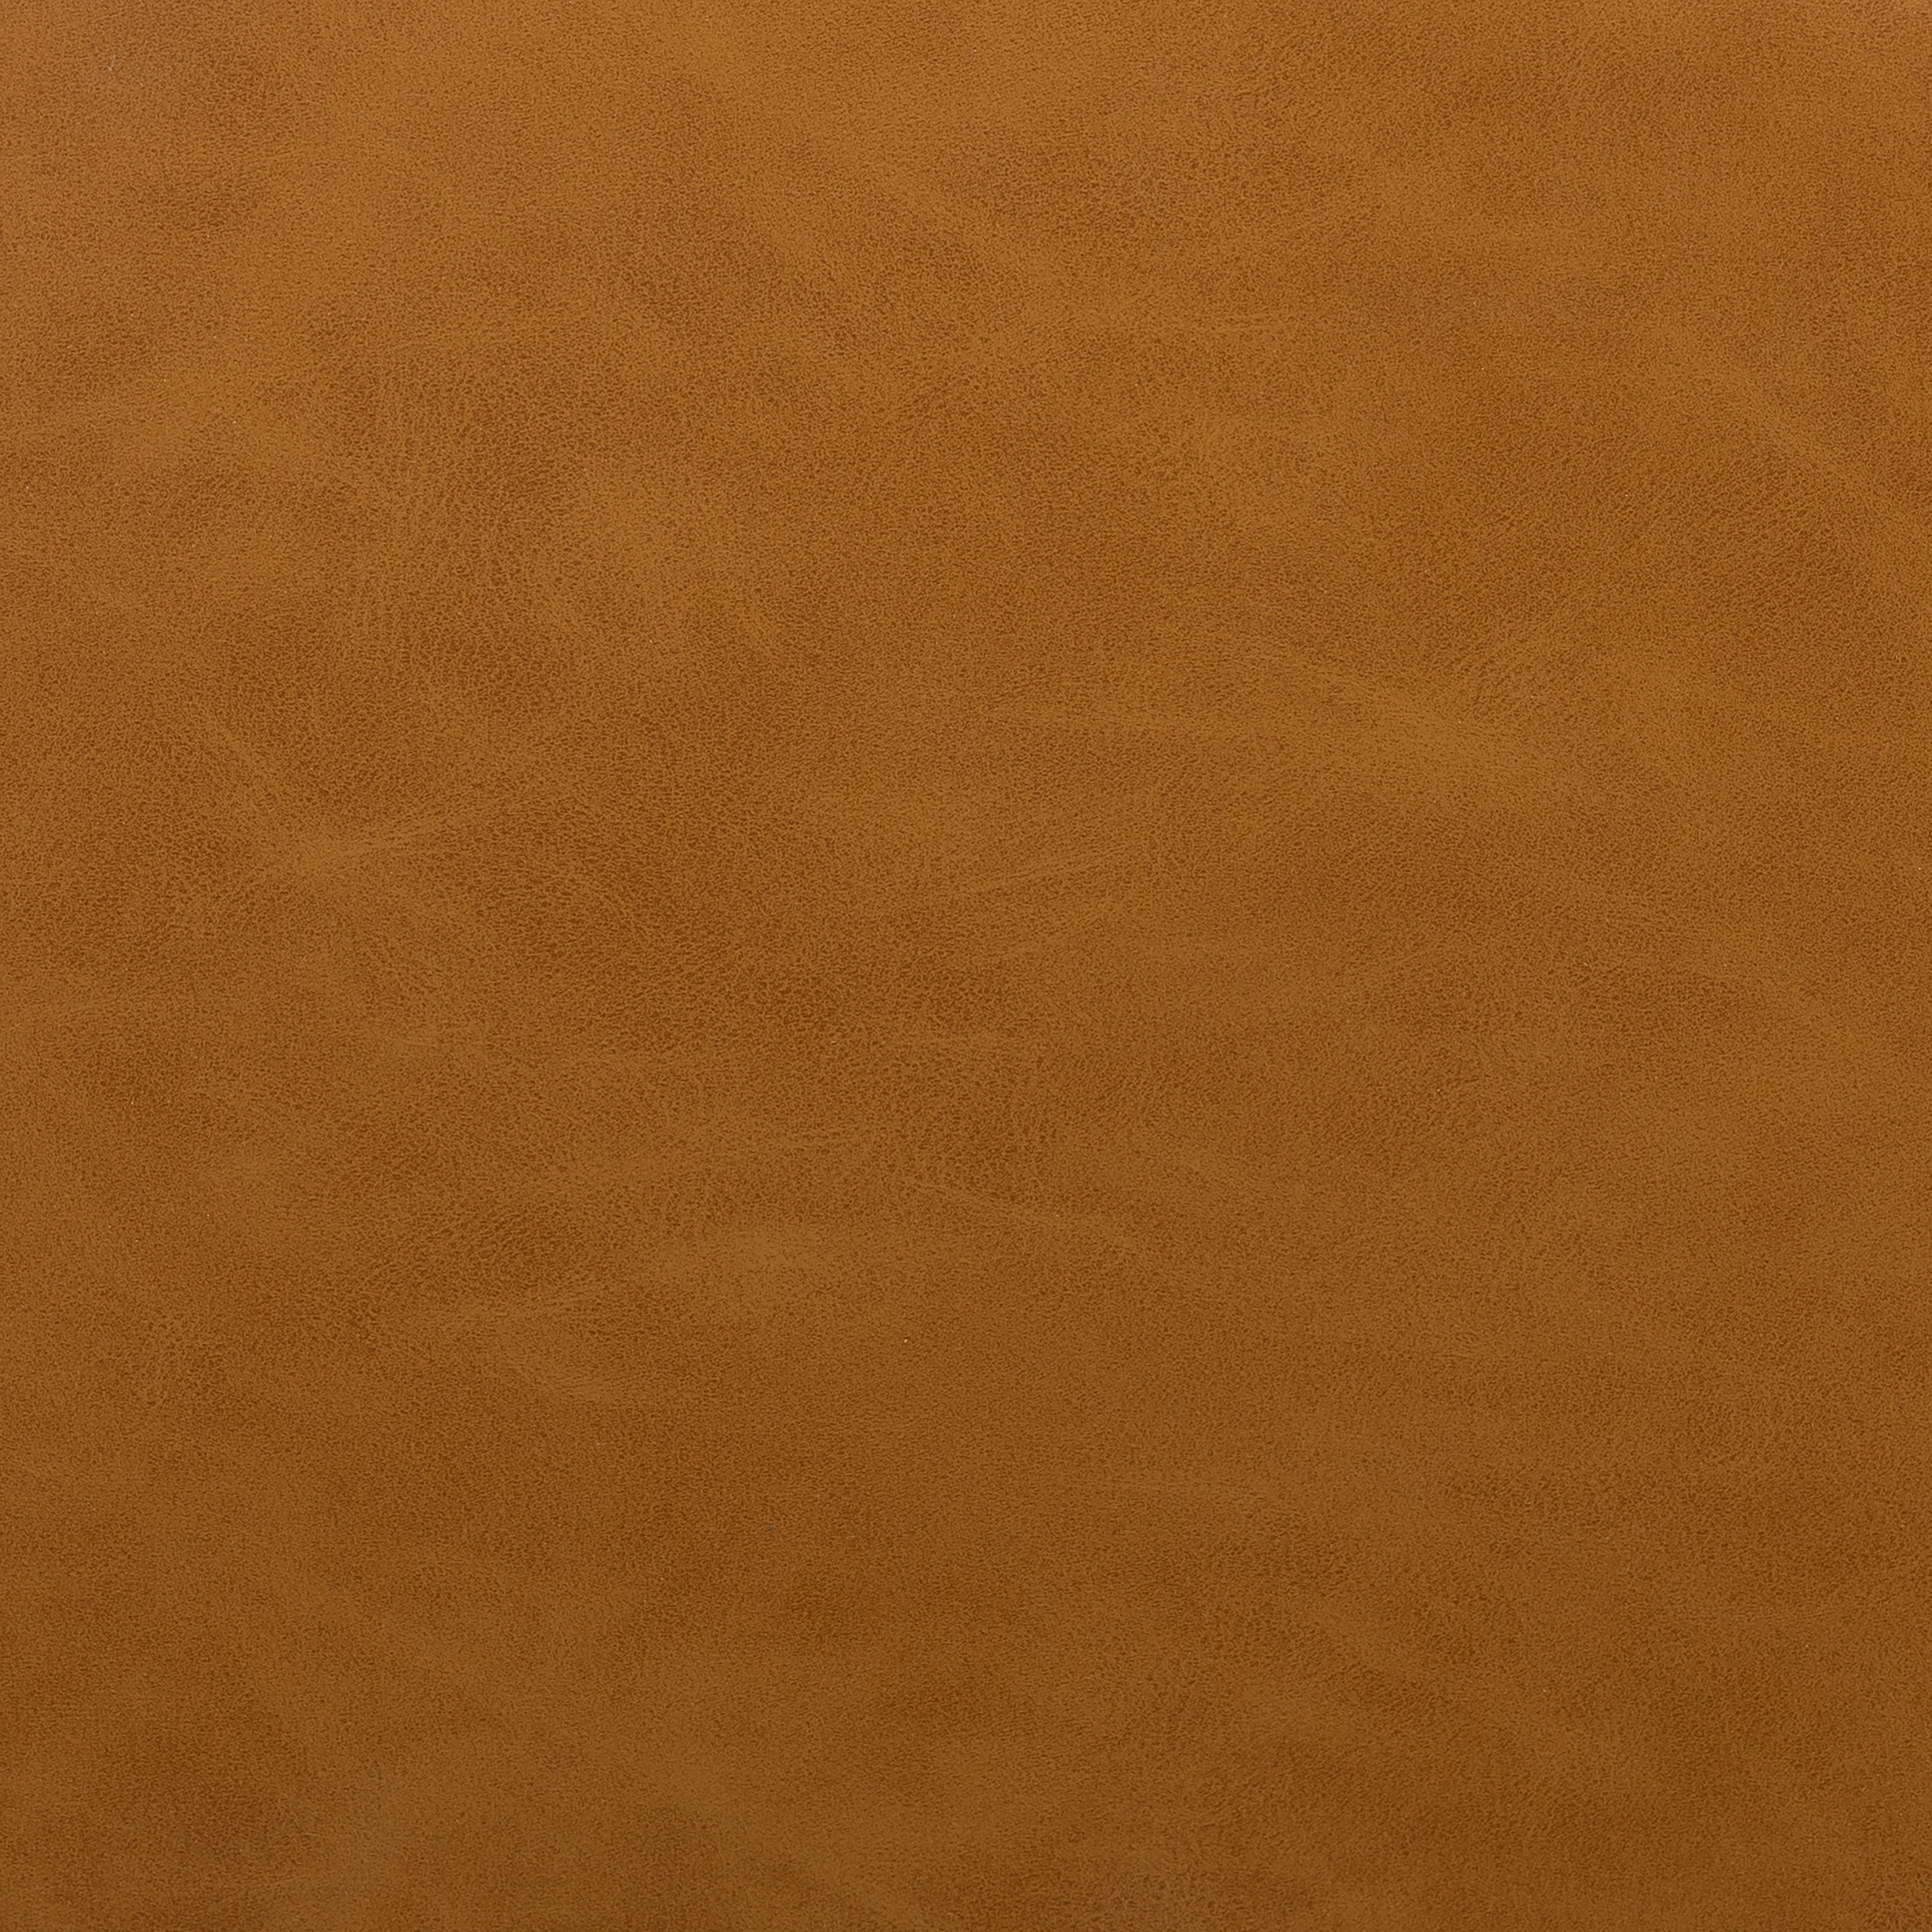 Sierra Butterscotch Faux Leather with Smoked Natural Parawood (Counter Height) | Union Bar/Counter Stool | Valley Ridge Furniture